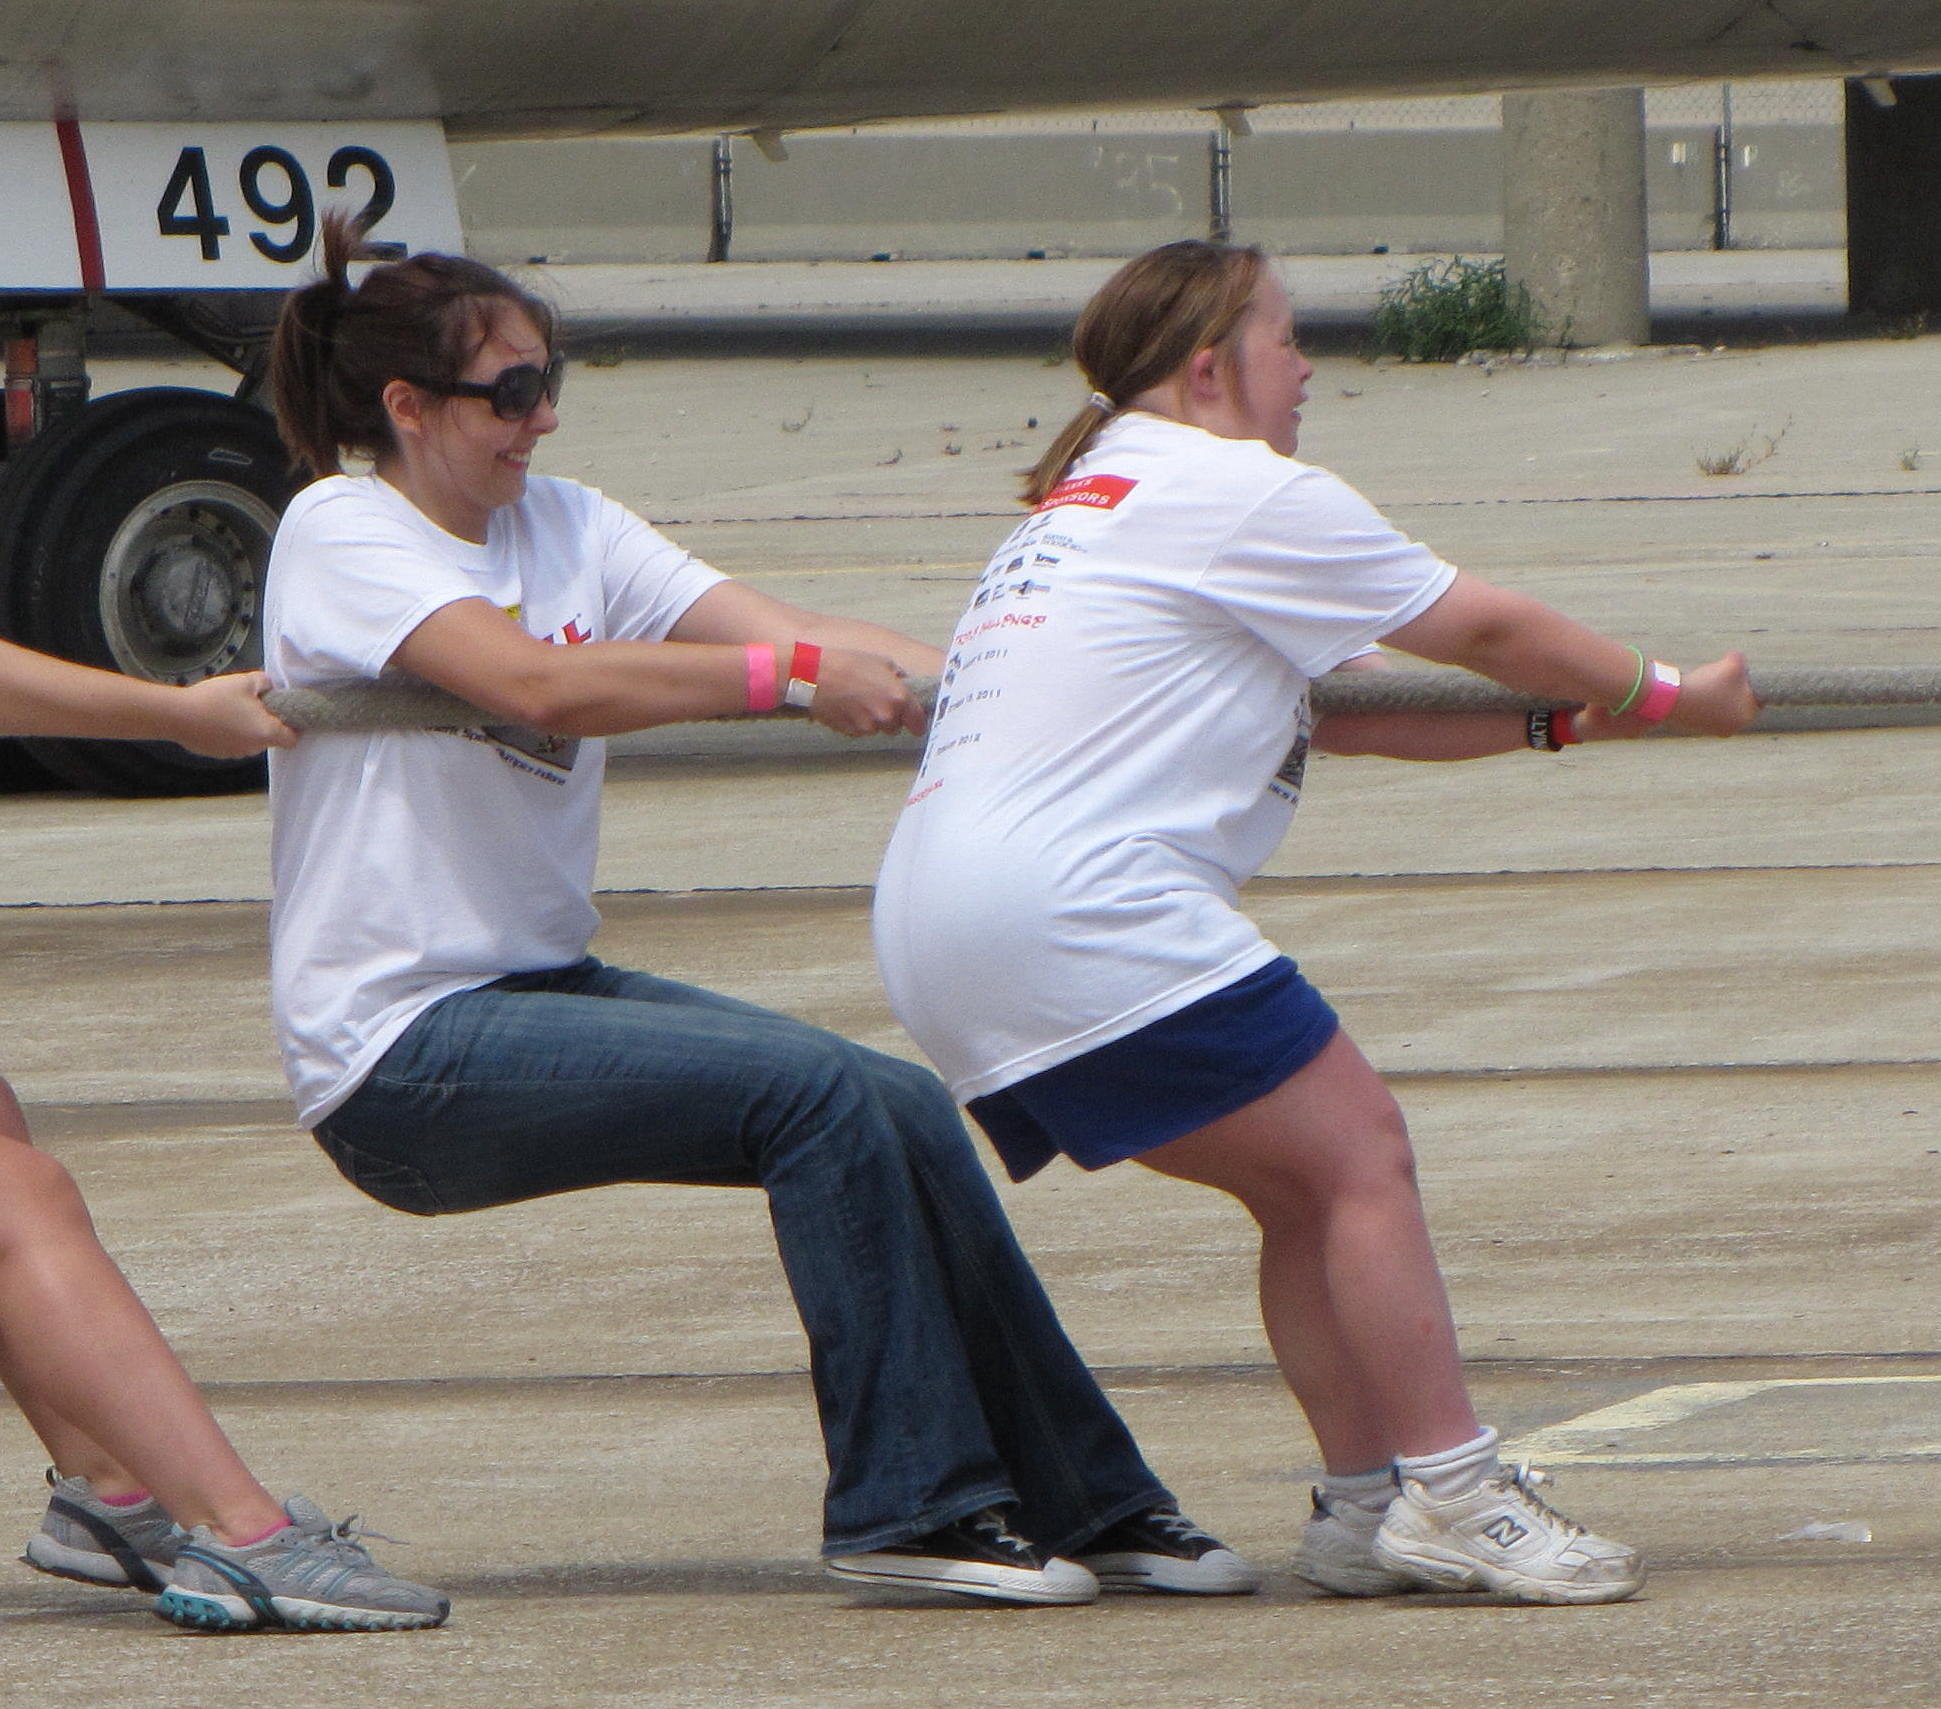 Challengers pull a FedEx plane during last year’s event. (Submitted photo)